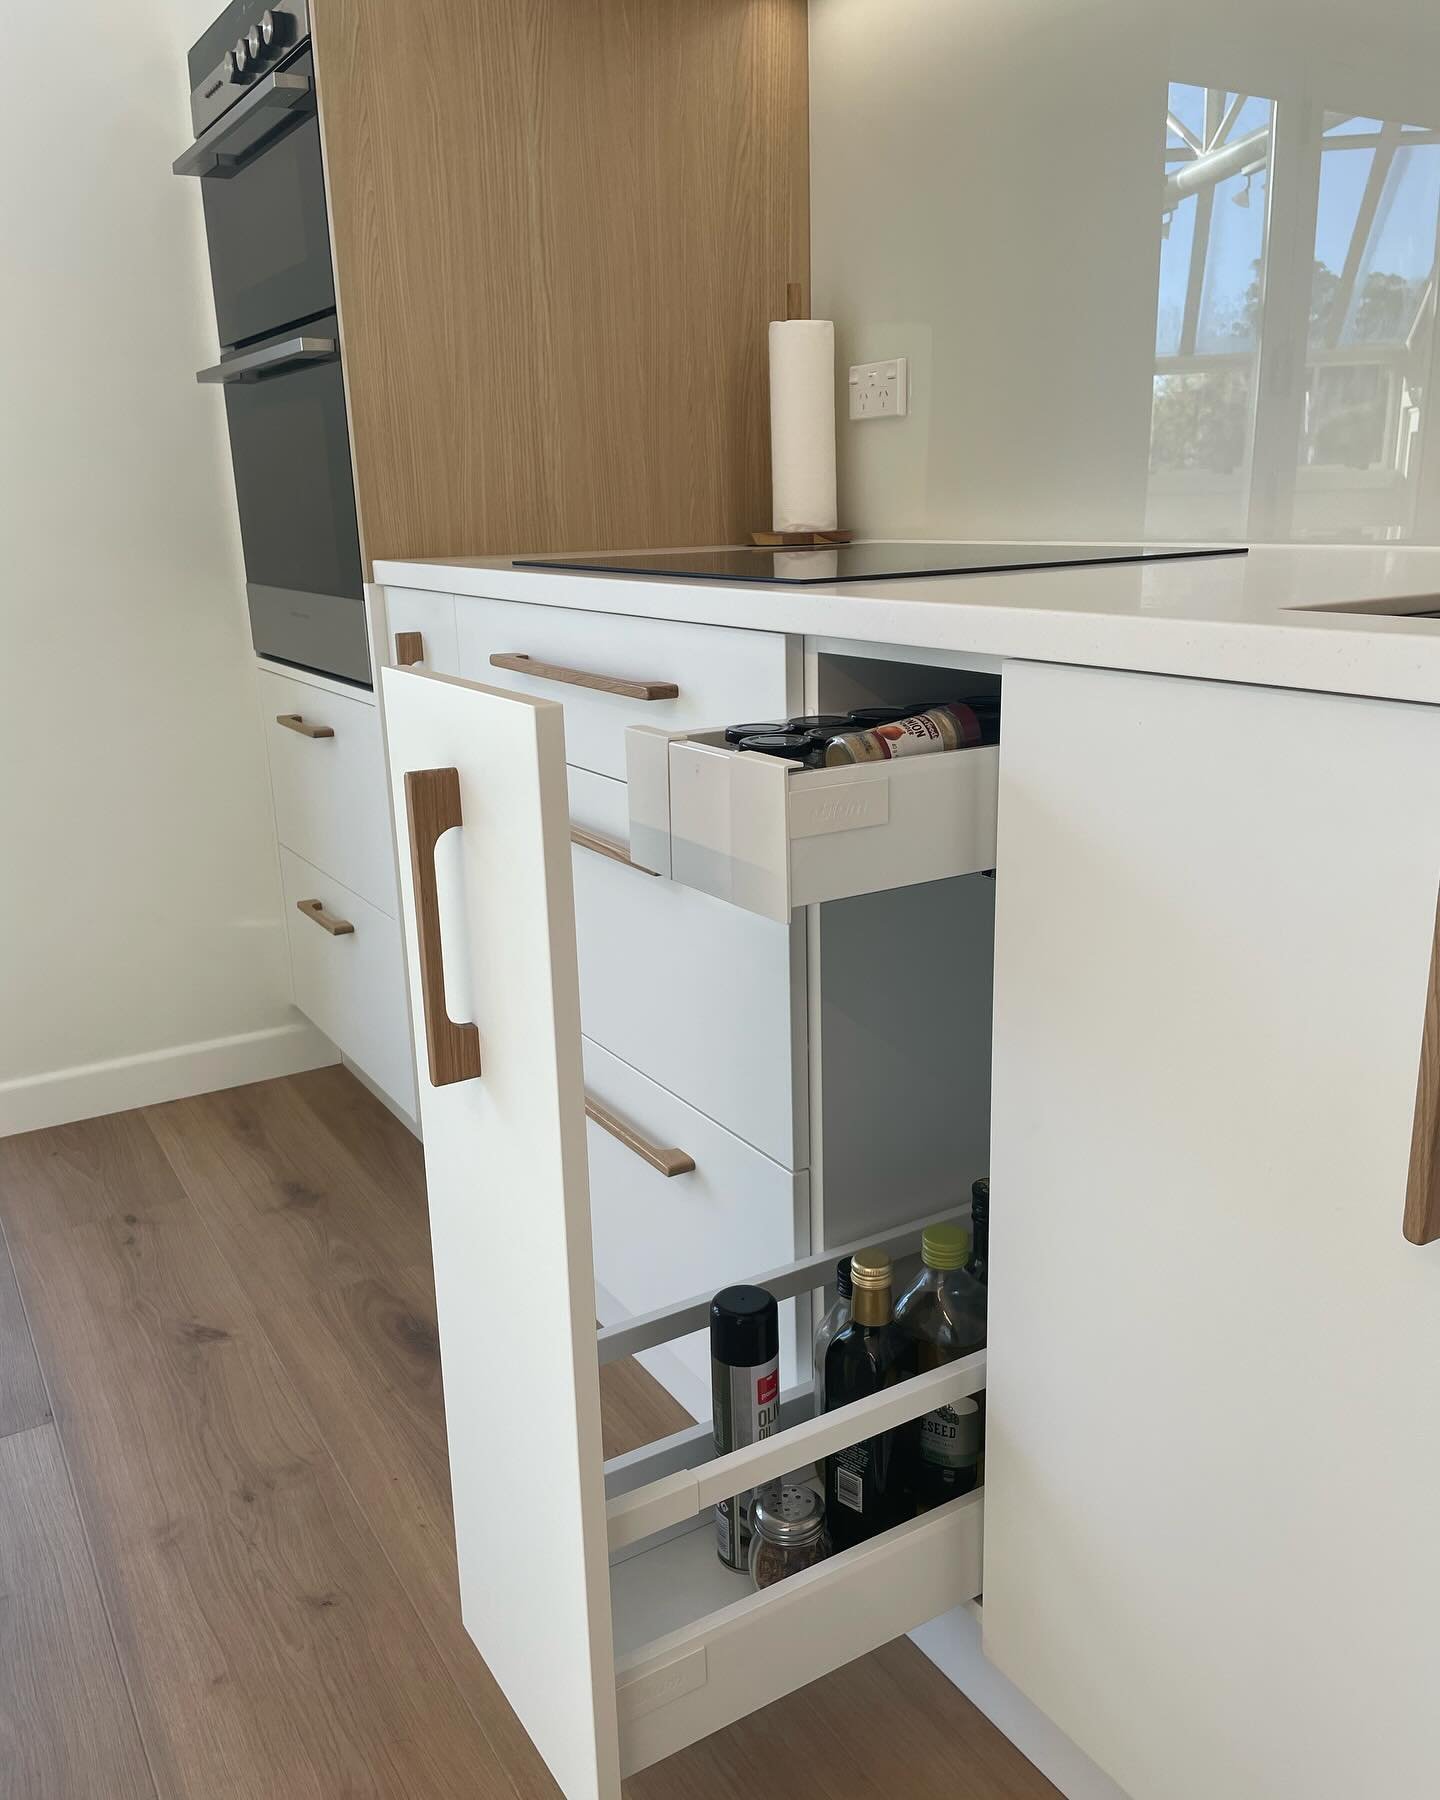 Inner draws - a feature we highly recommend to all of our clients! 

Not only do inner draws add a lot more storage to your kitchen, they also allow the design of you kitchen to have a crisp and spacious aesthetic. 

Inner draws are great to hold cut